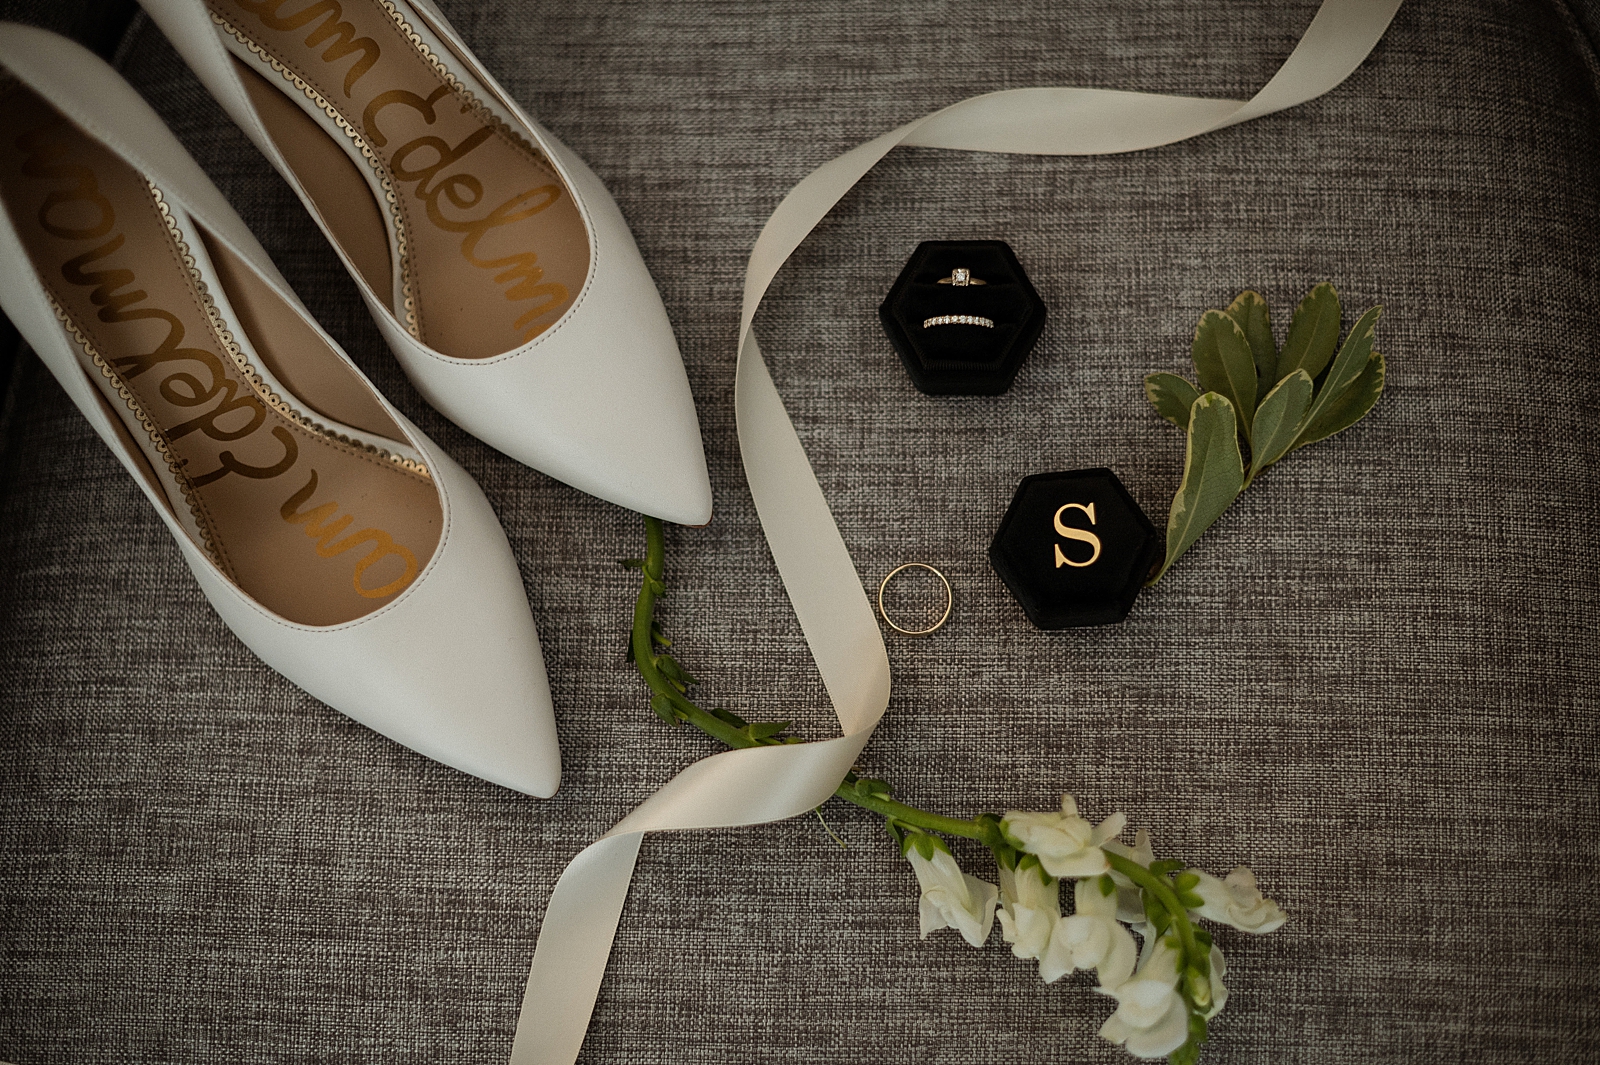 Detail shot of Sam Edelman wedding shoes with wedding bands and engagement ring